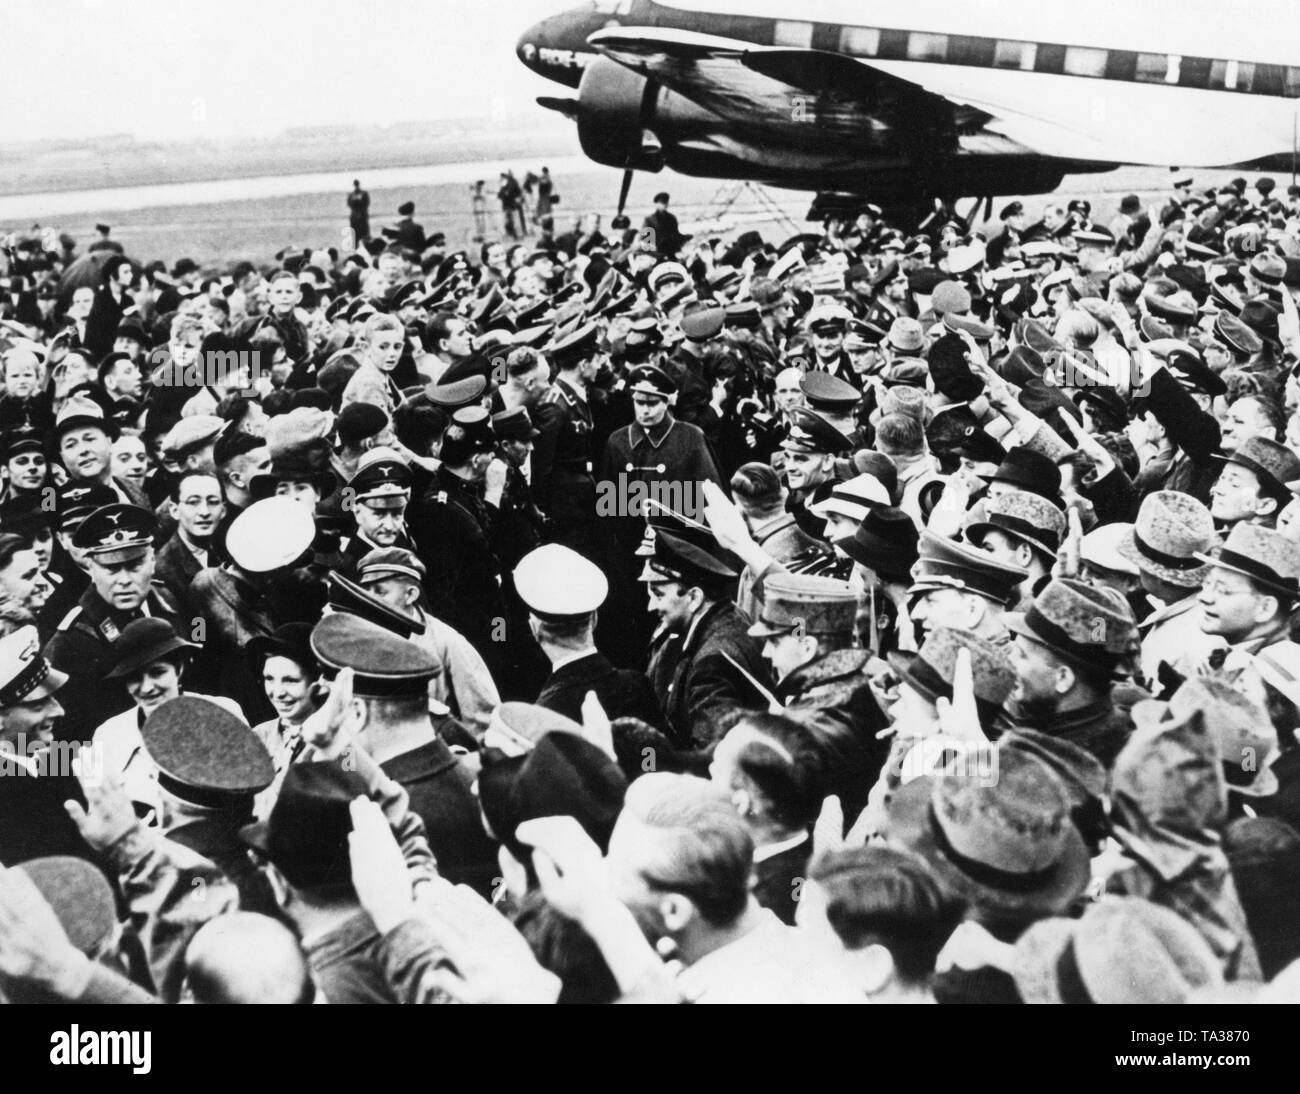 Reception of the crew of a Focke-Wulf FW 200 Condor after a non-stop flight from New York to Berlin-Tempelhof. In the middle, the fighter pilot, aircraft designer and later Chief of Aircraft Procurement and Supply of the Luftwaffe, Ernst Udet. Stock Photo